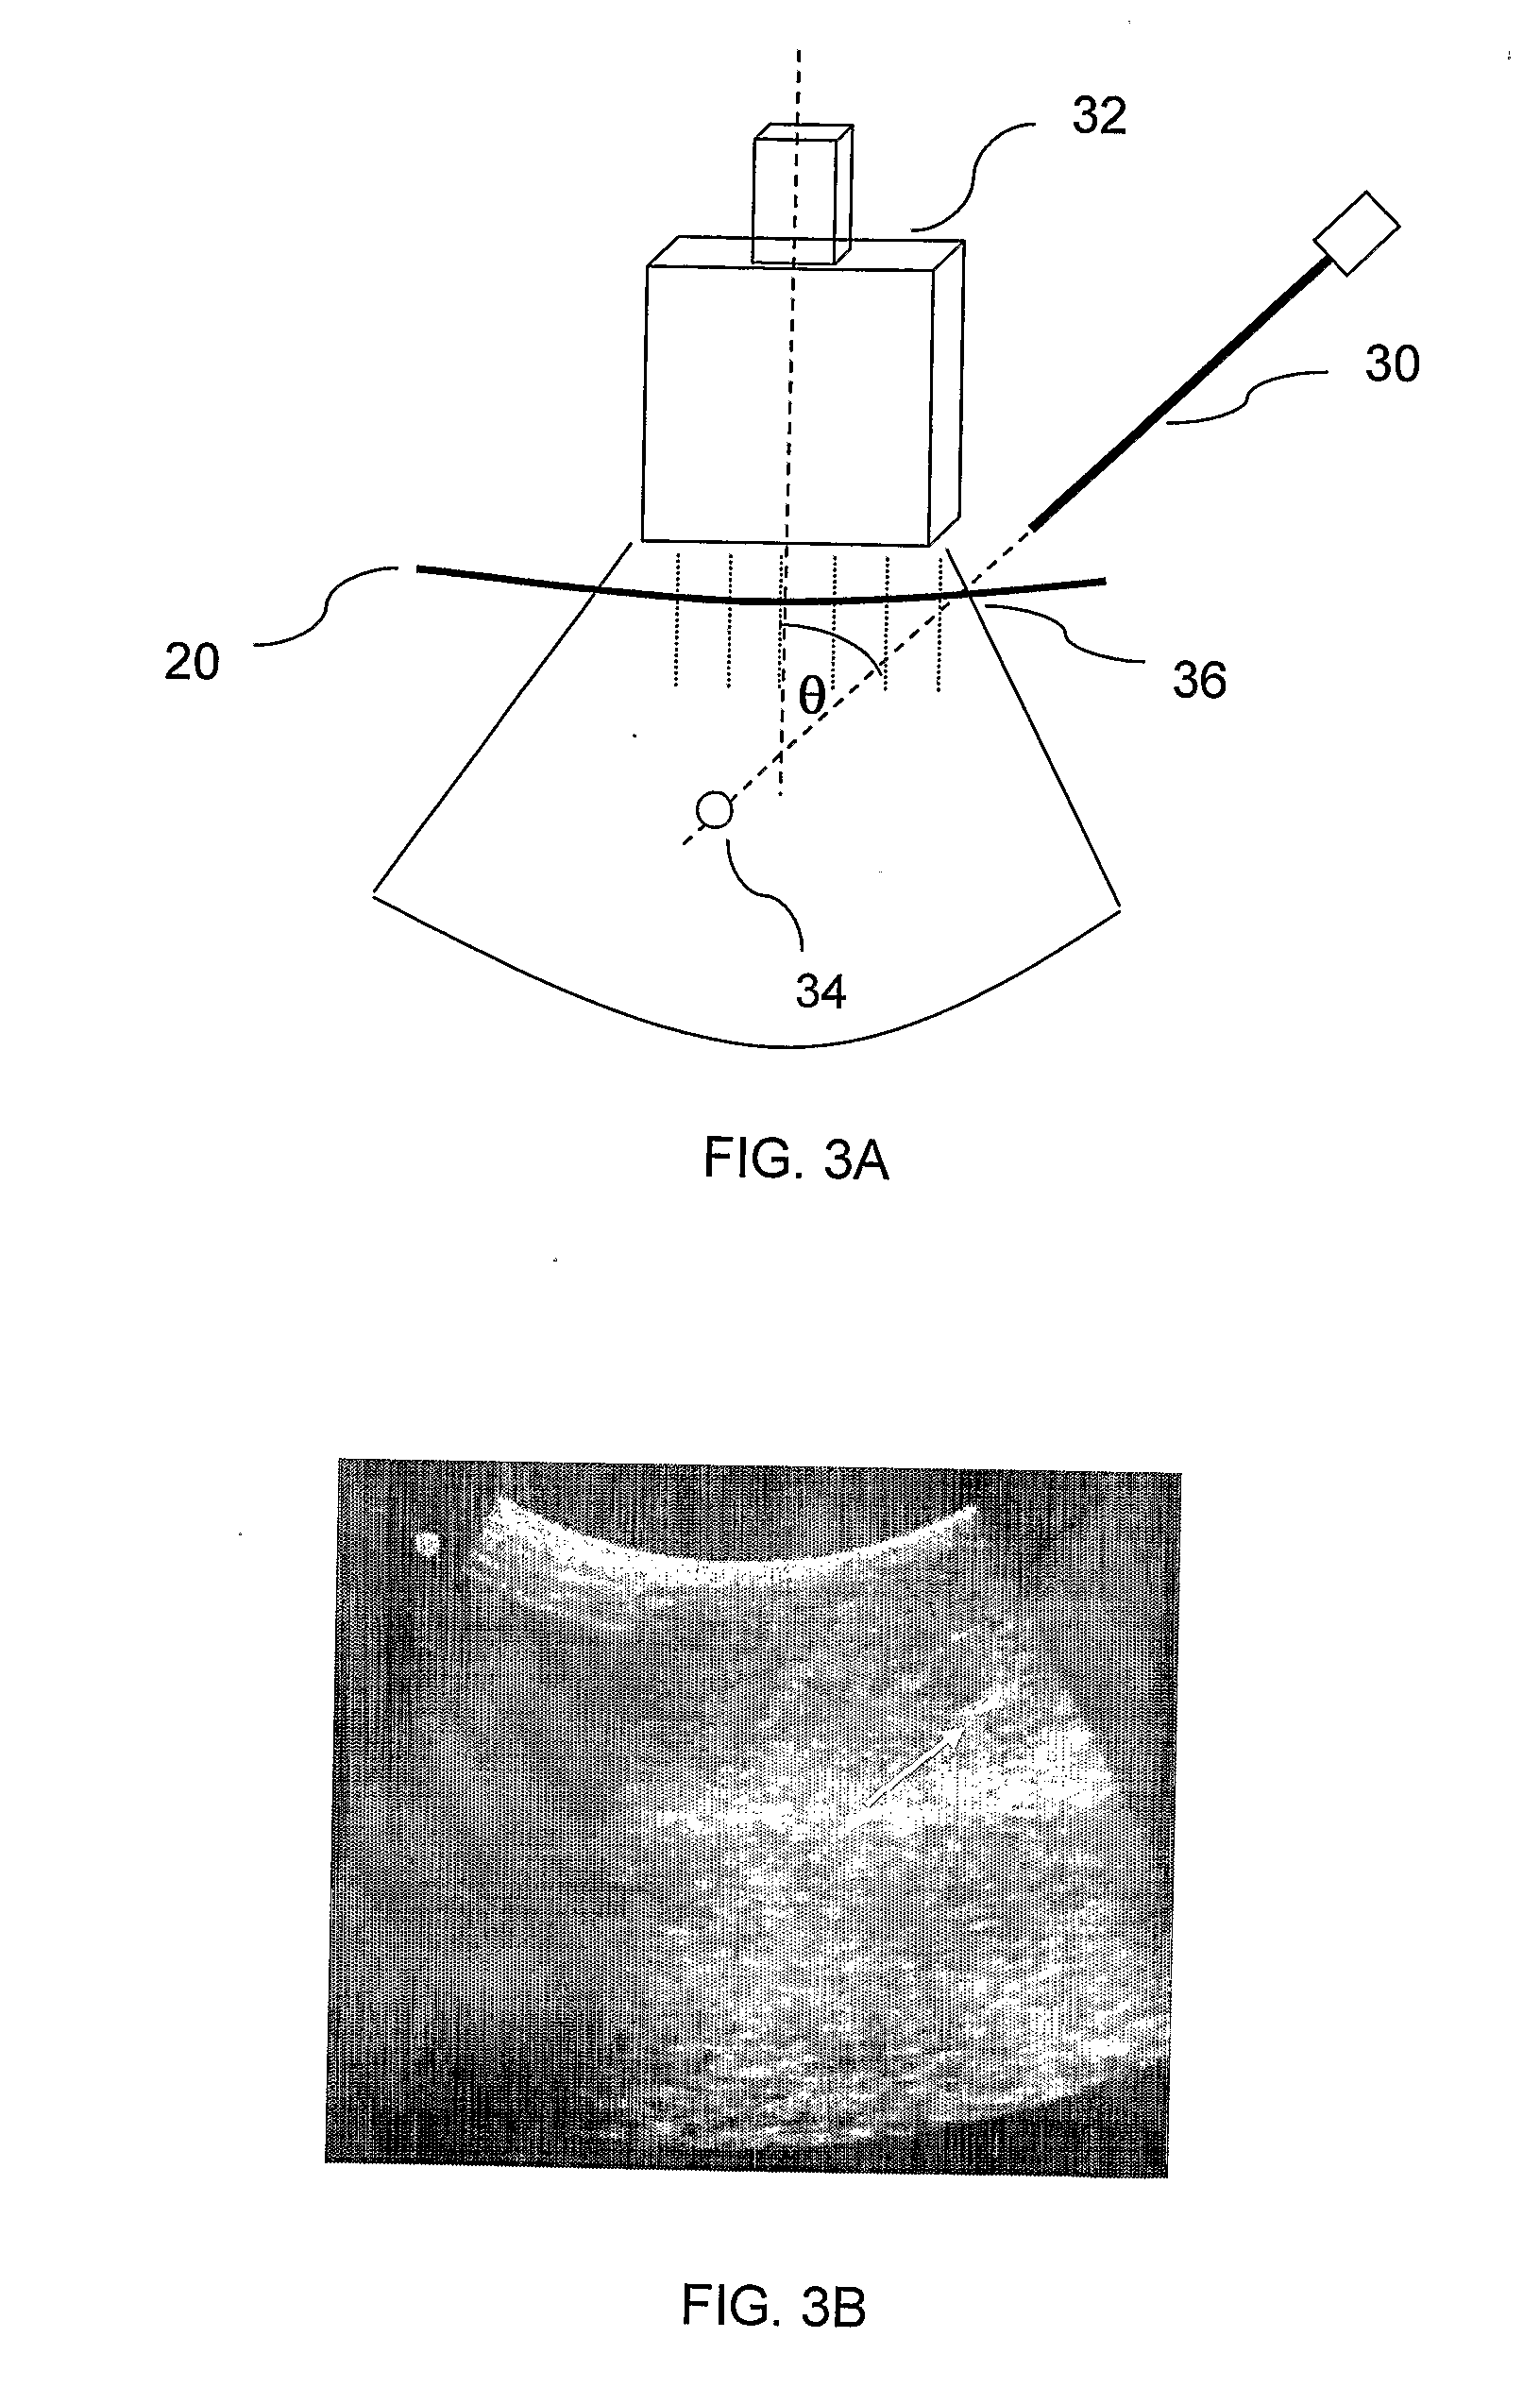 Ultrasound guided robot for flexible needle steering